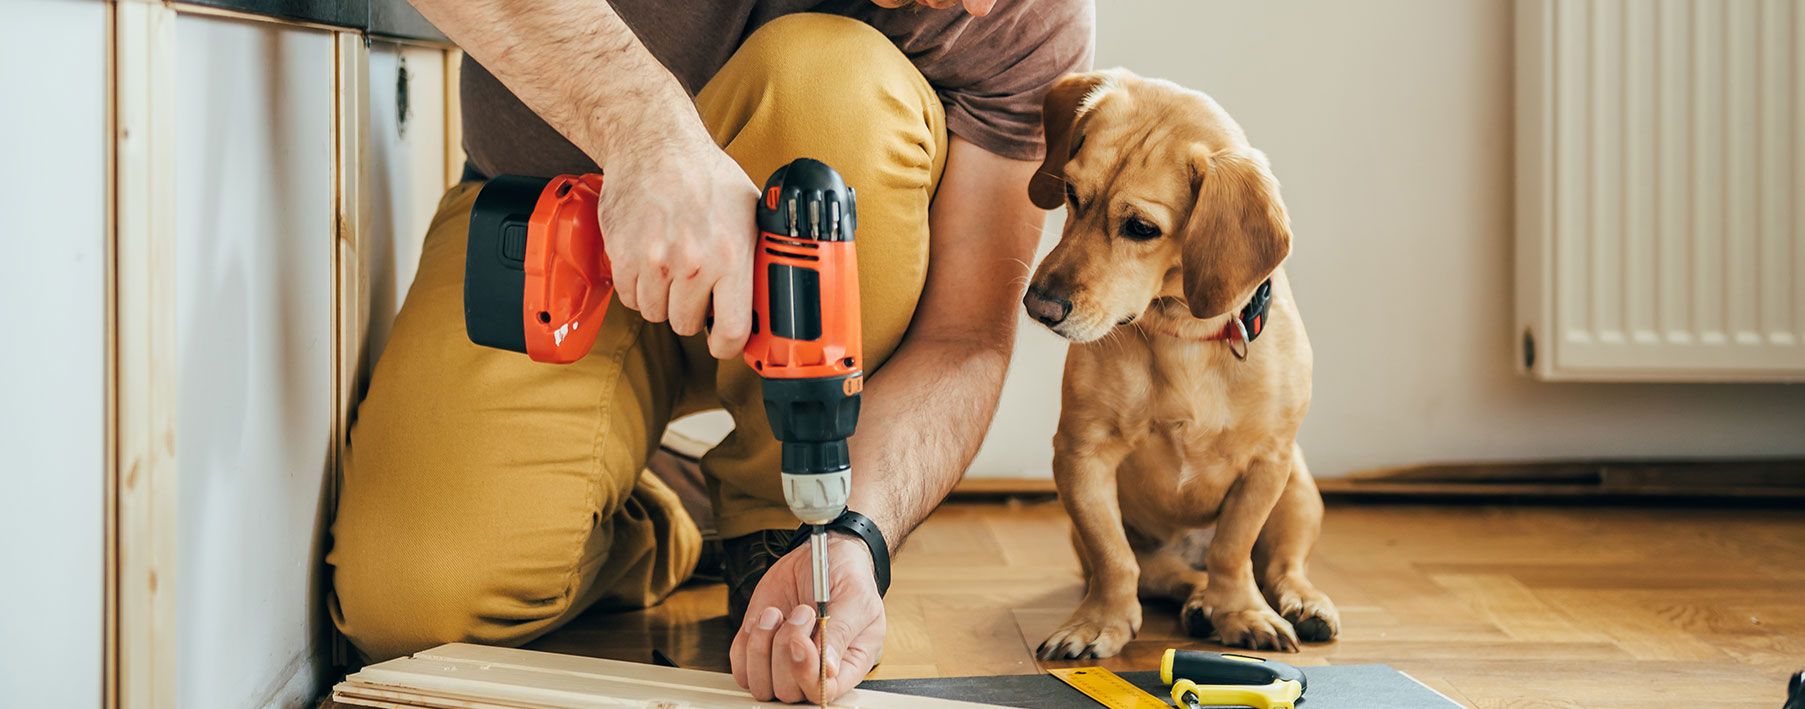 A man using a power tool a with a small puppy to his left